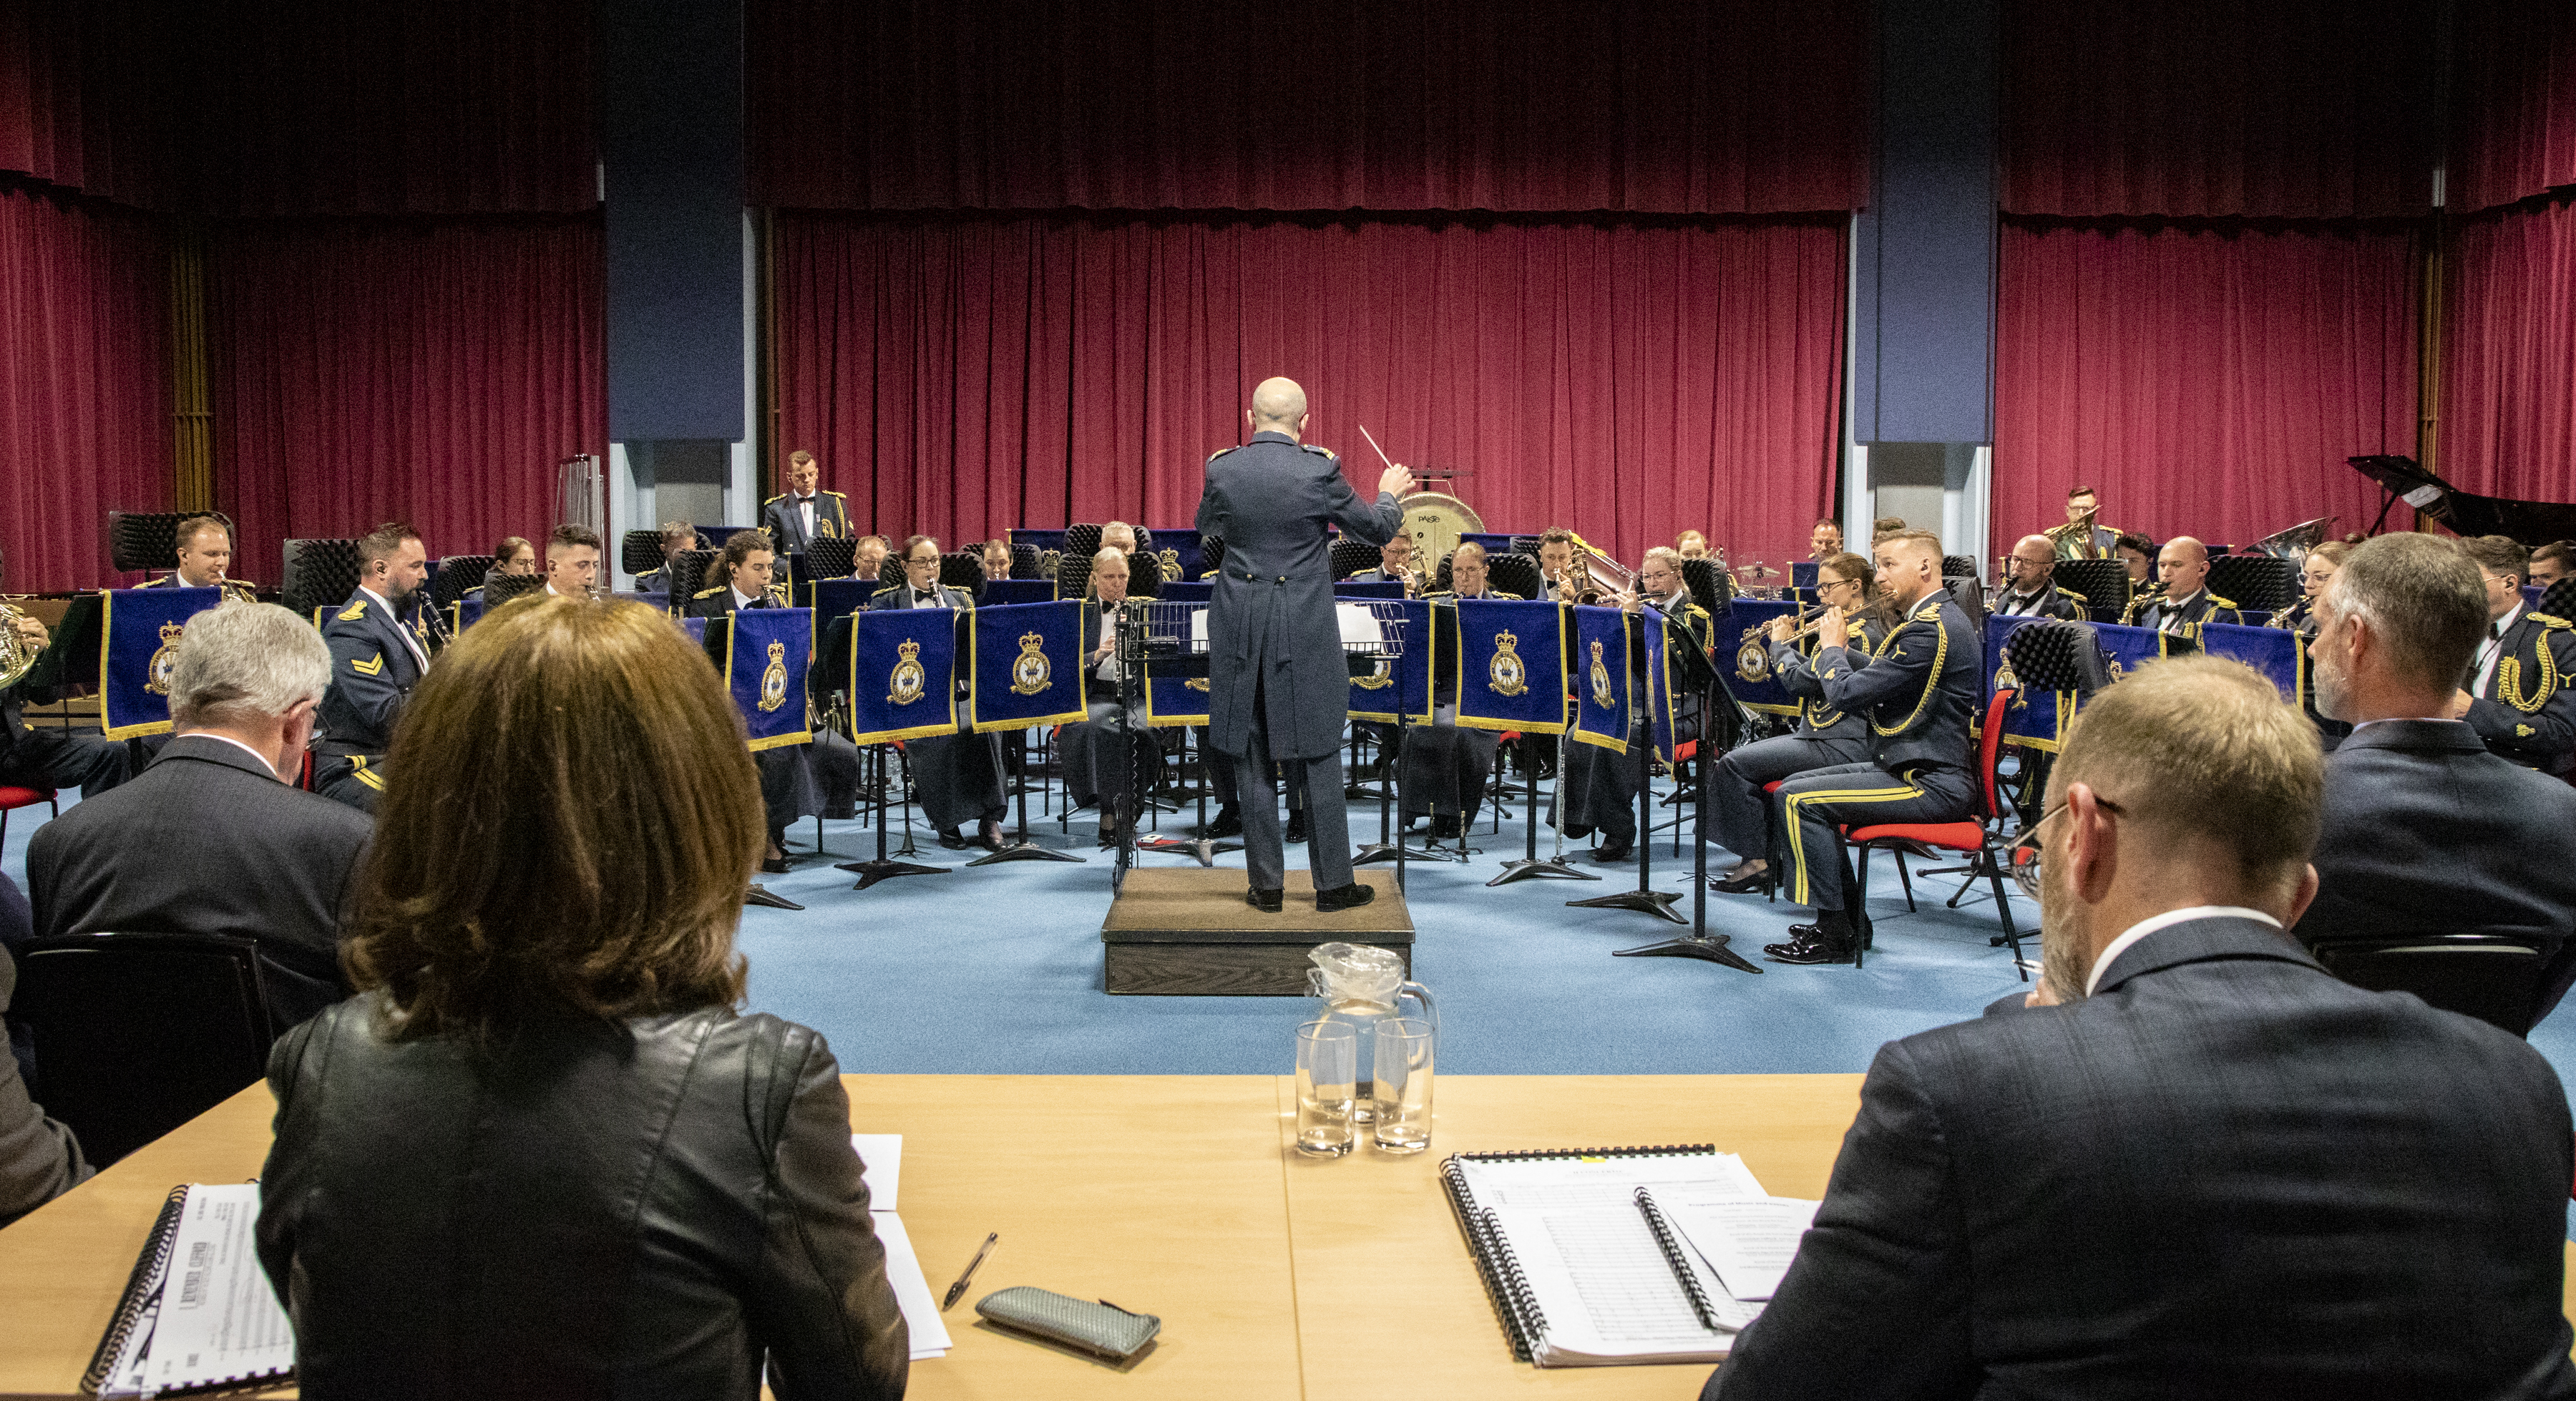 Conductor and Band are watched by Adjudicators.